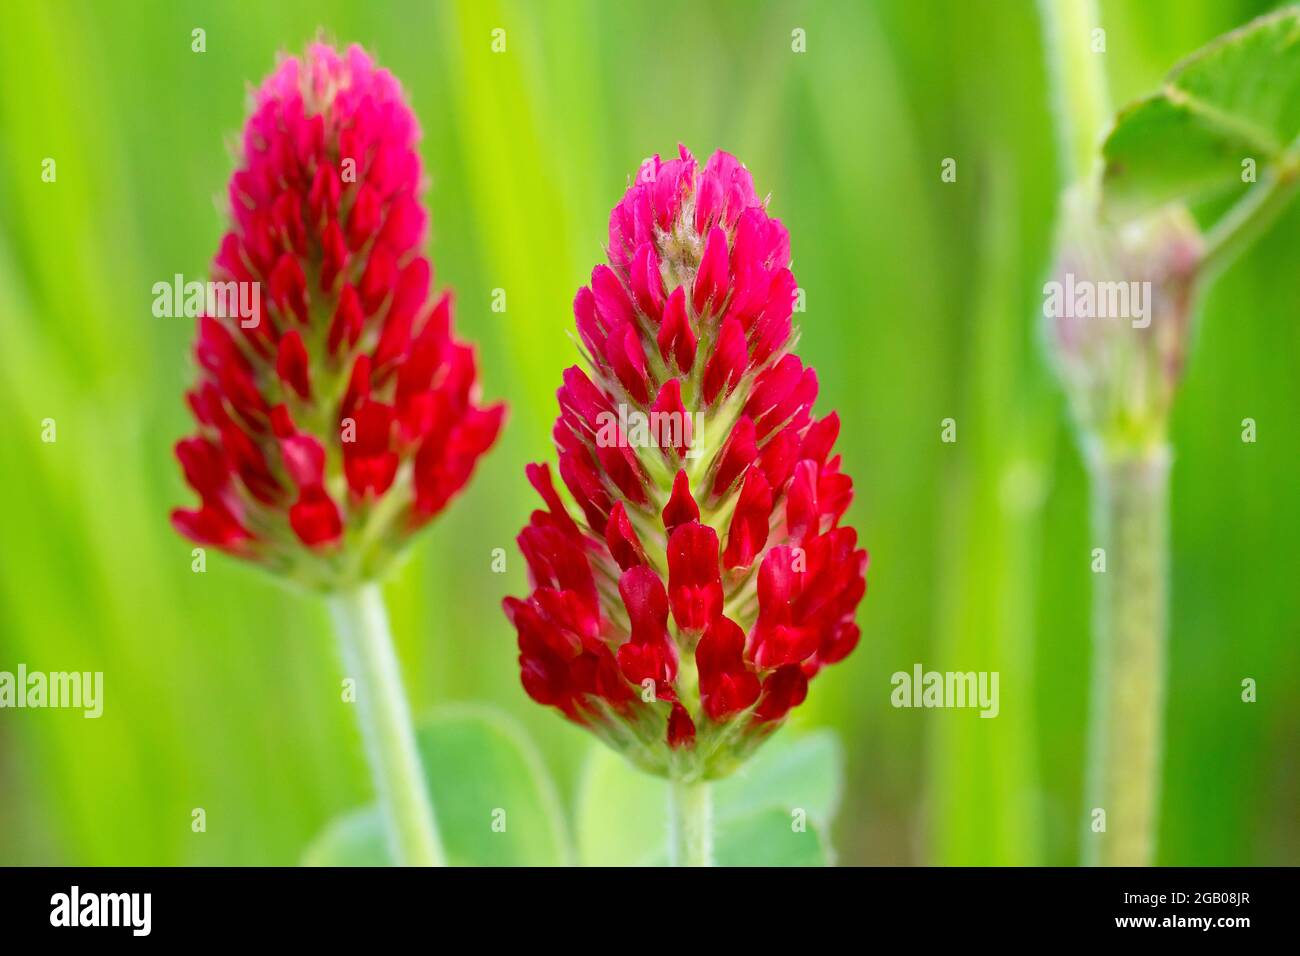 Crimson Clover (trifolium incarnatum), widely planted as green manure in agriculture, close up of two flowerheads isolated against a green background. Stock Photo